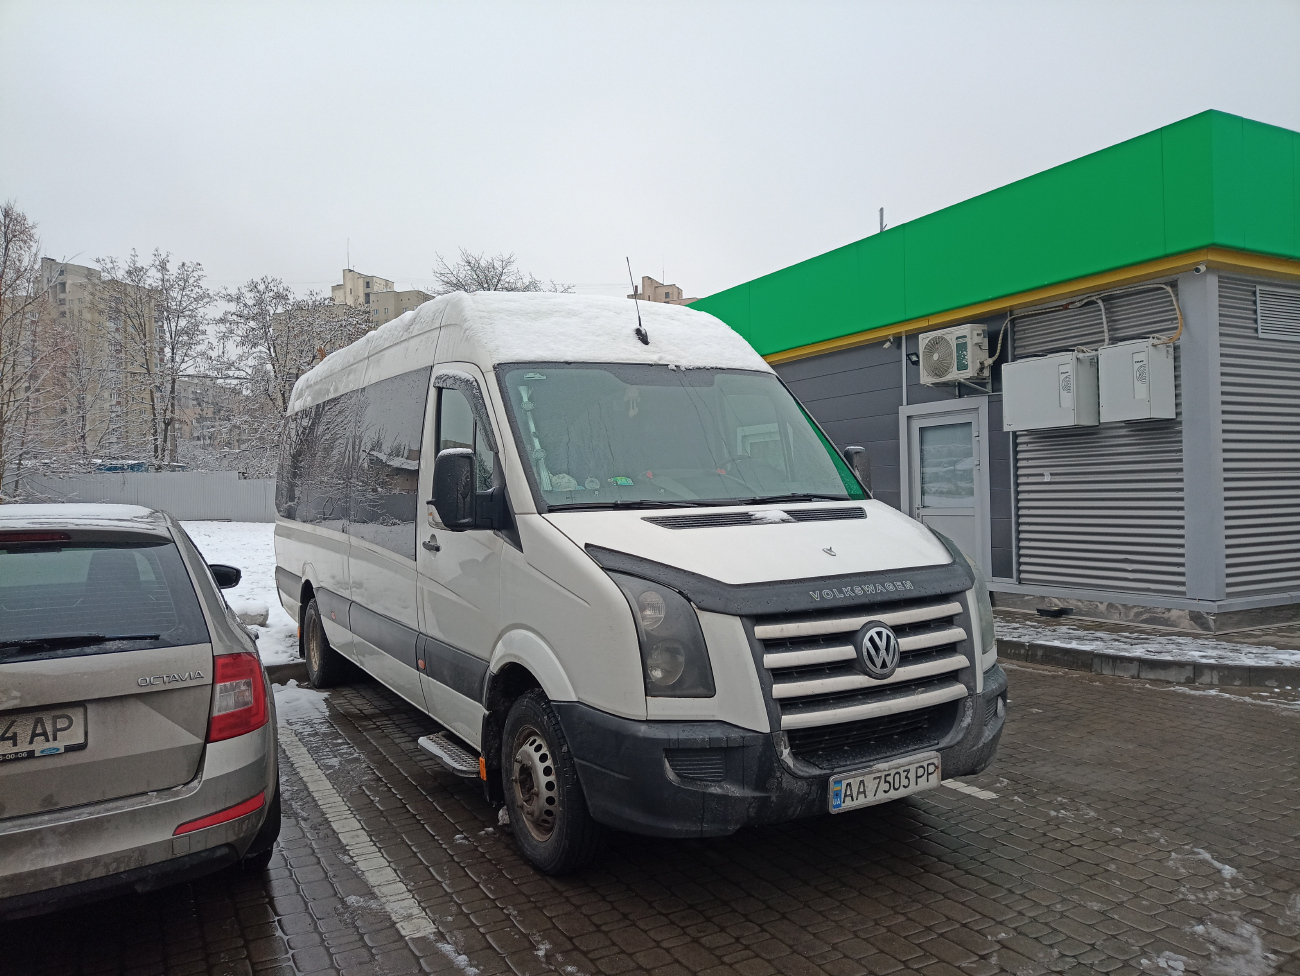 Kiev, Carsport (VW Crafter) # АА 7503 РР